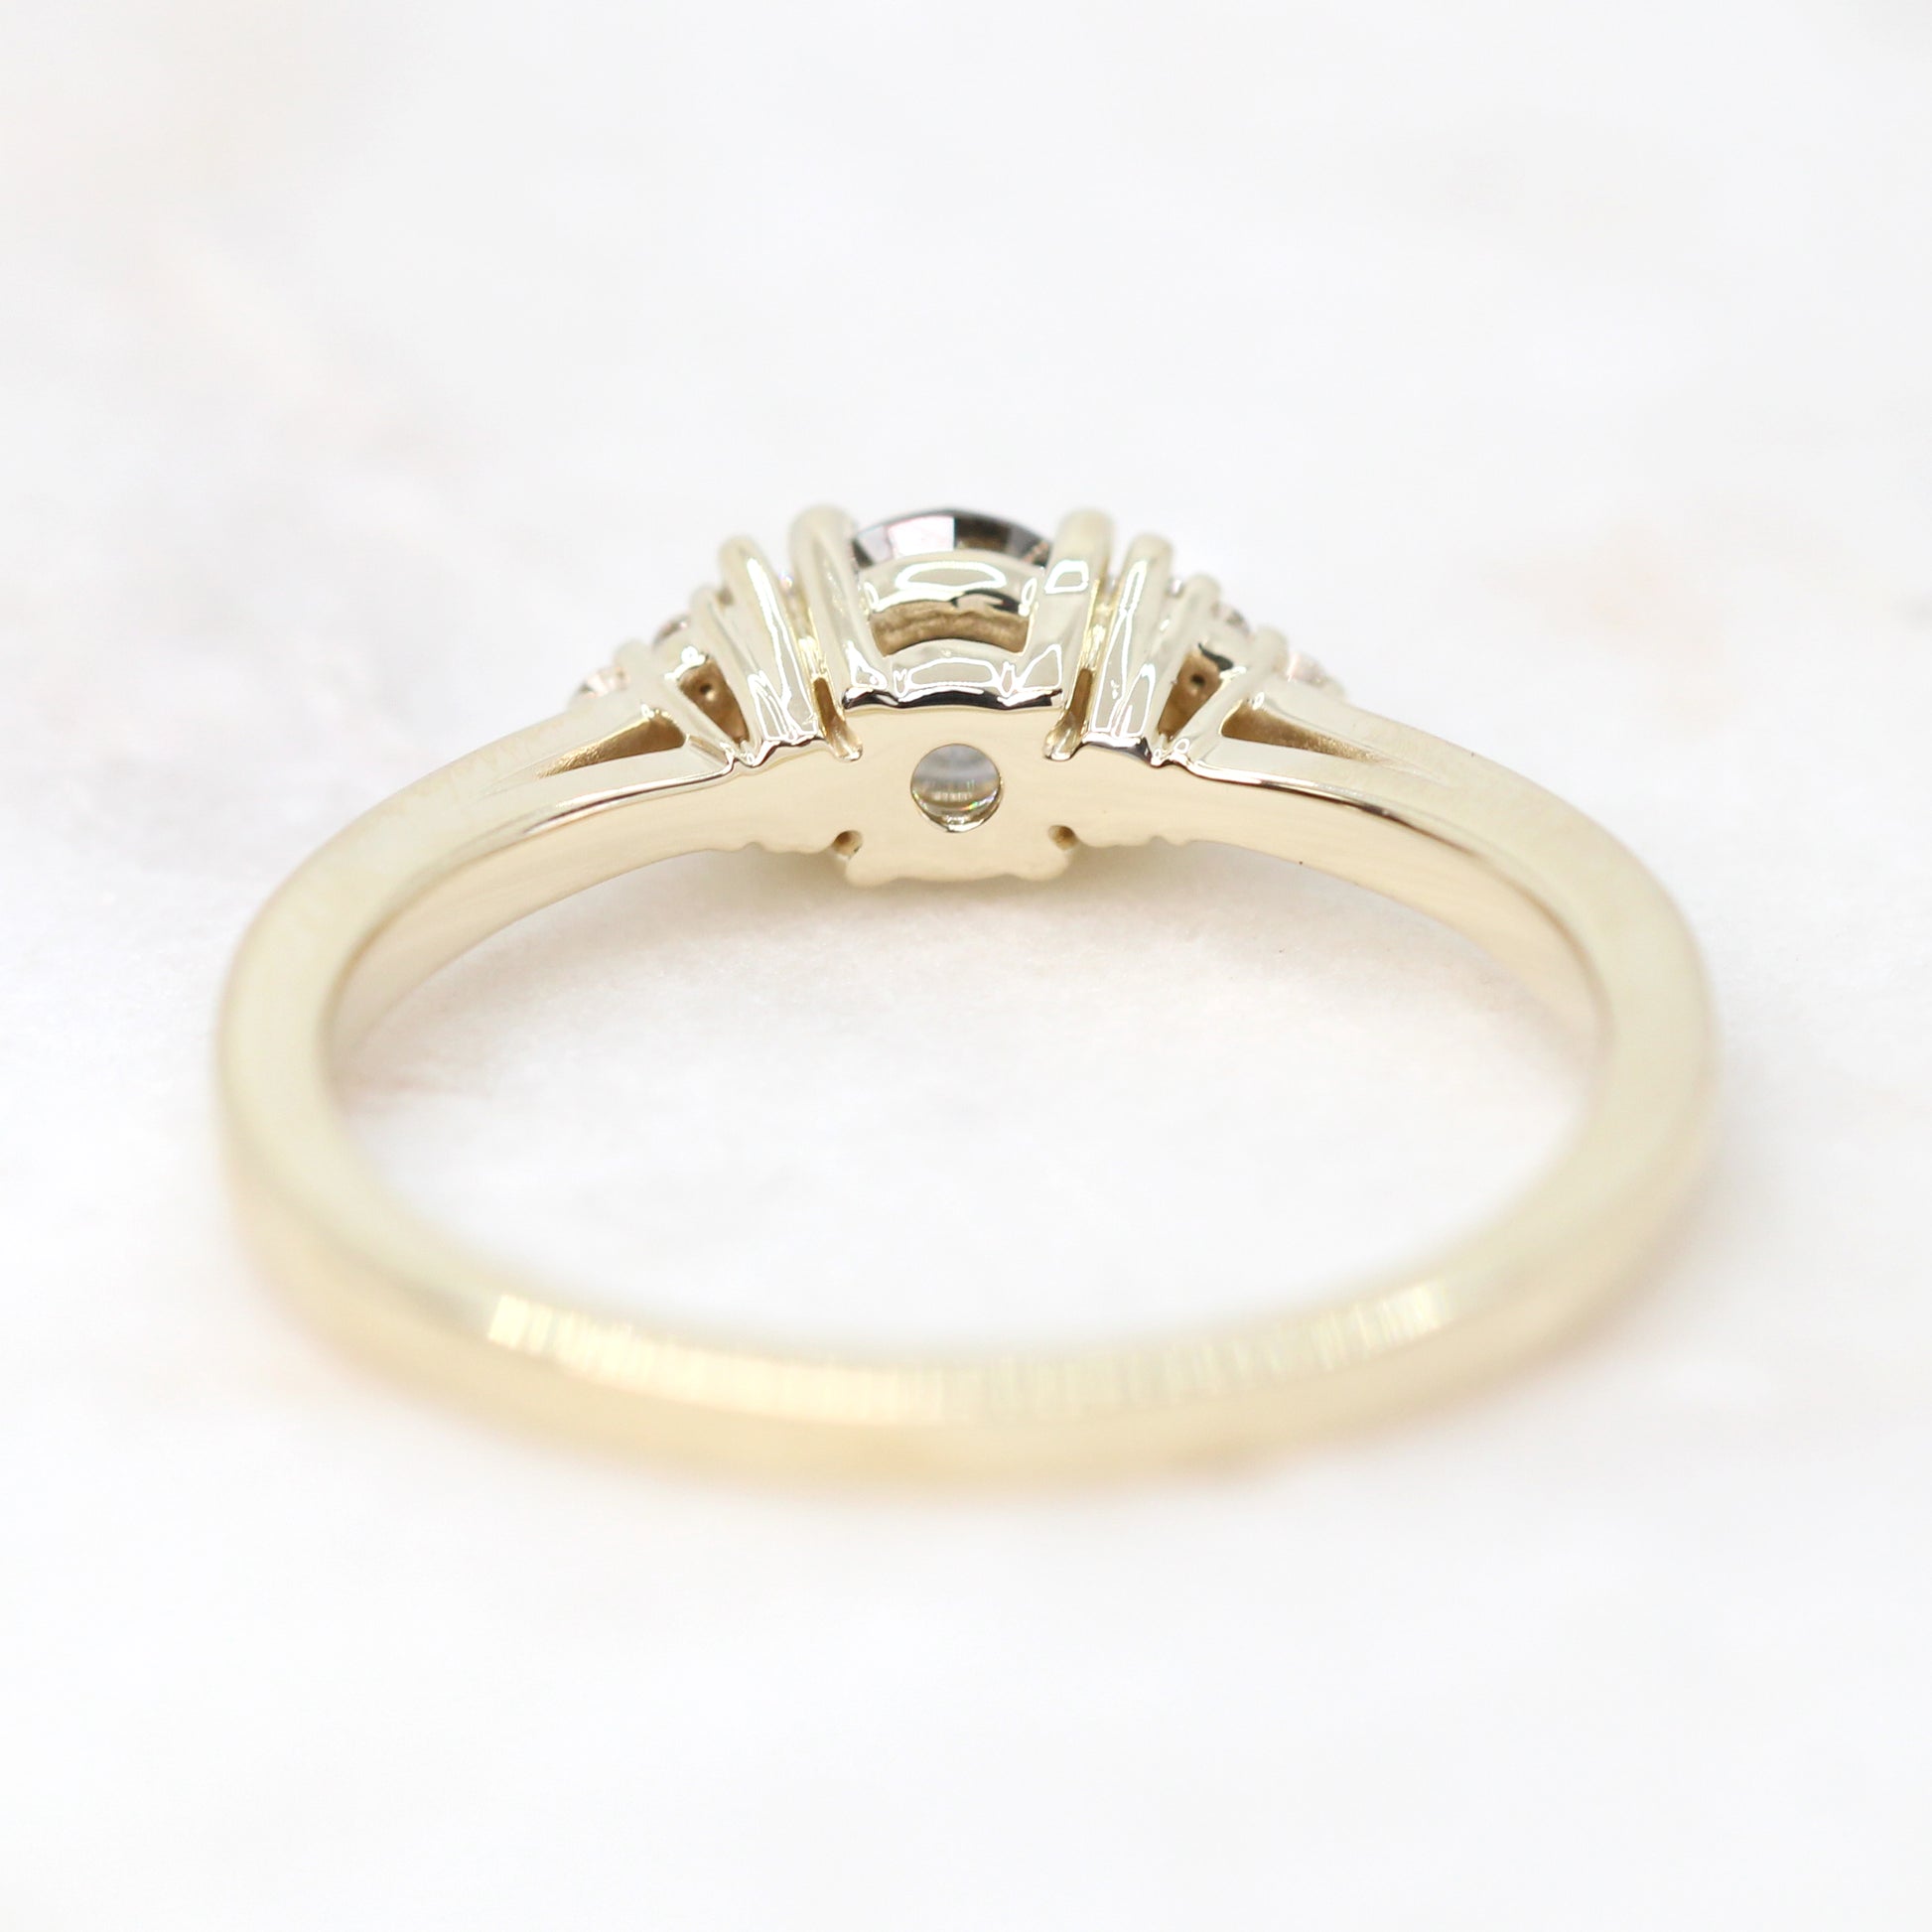 Autumn Ring with a 0.56 Carat Round Champagne Celestial Diamond and White Accent Diamonds in 14k Yellow Gold - Ready to Size and Ship - Midwinter Co. Alternative Bridal Rings and Modern Fine Jewelry